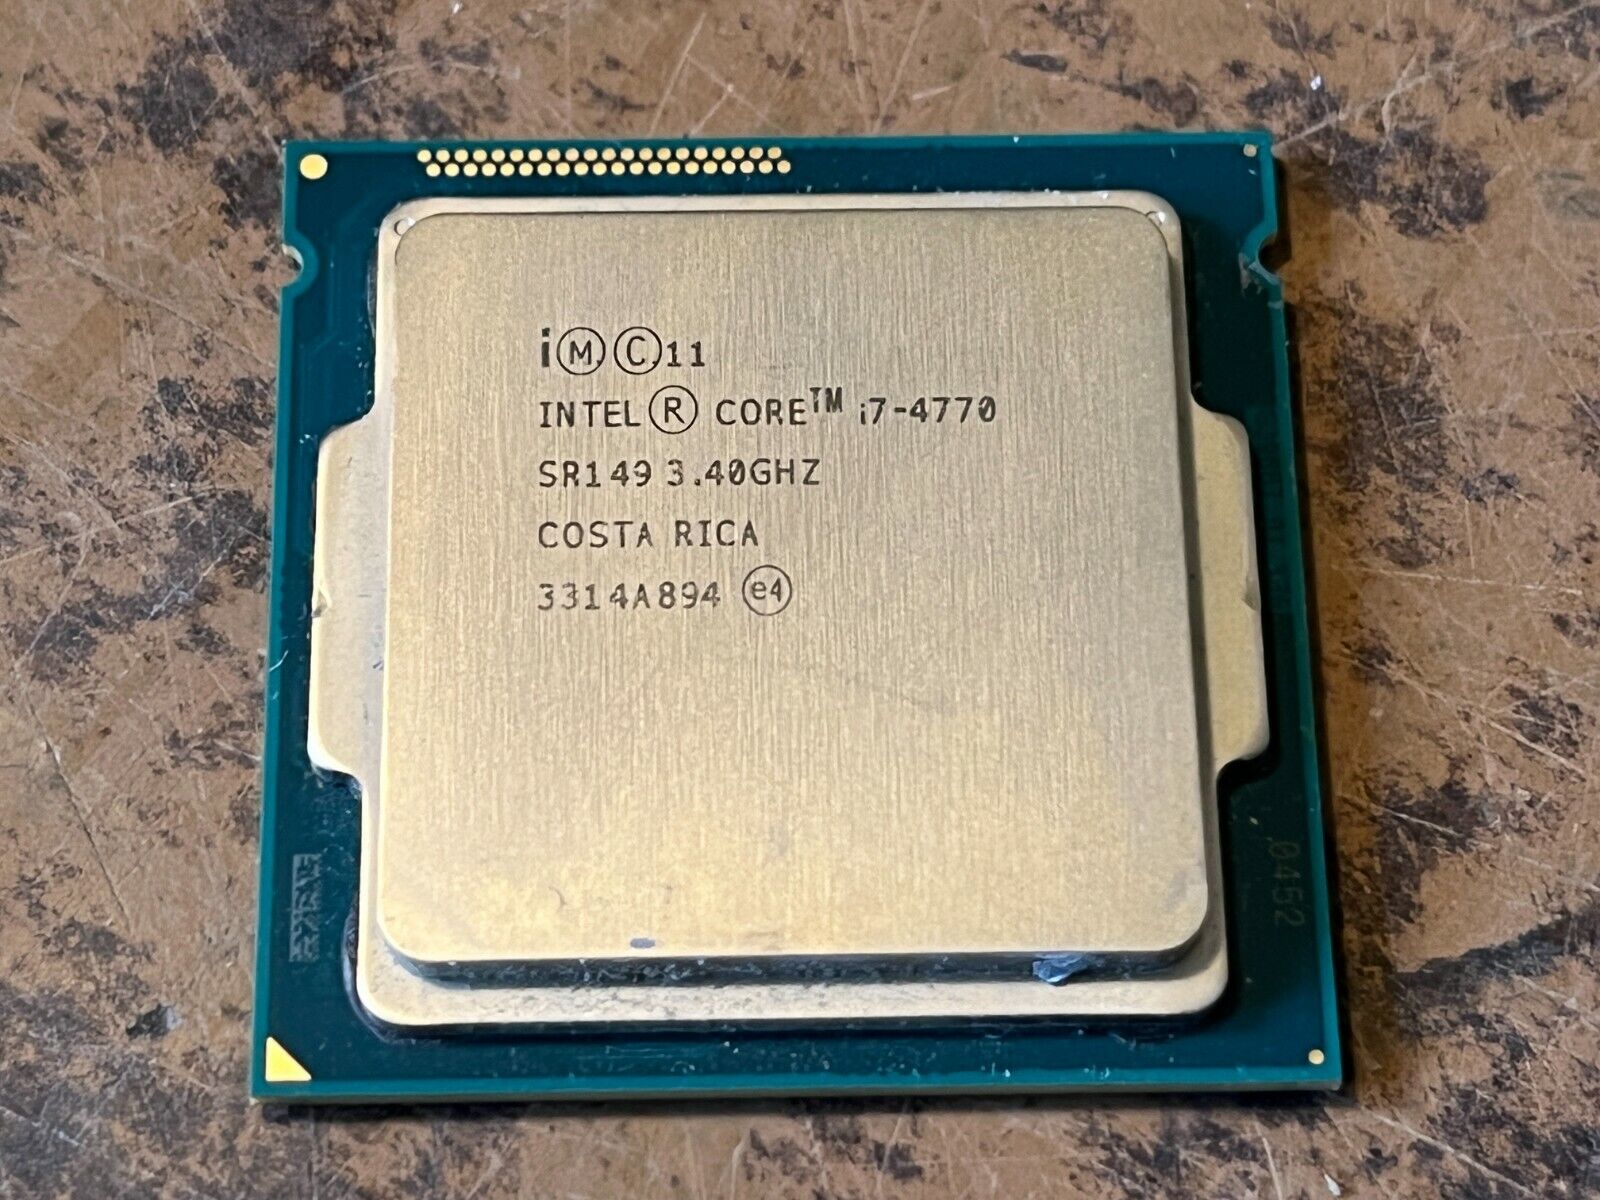 Intel Core i7-4770 3.4GHz Quad-Core CPU - Tested Working